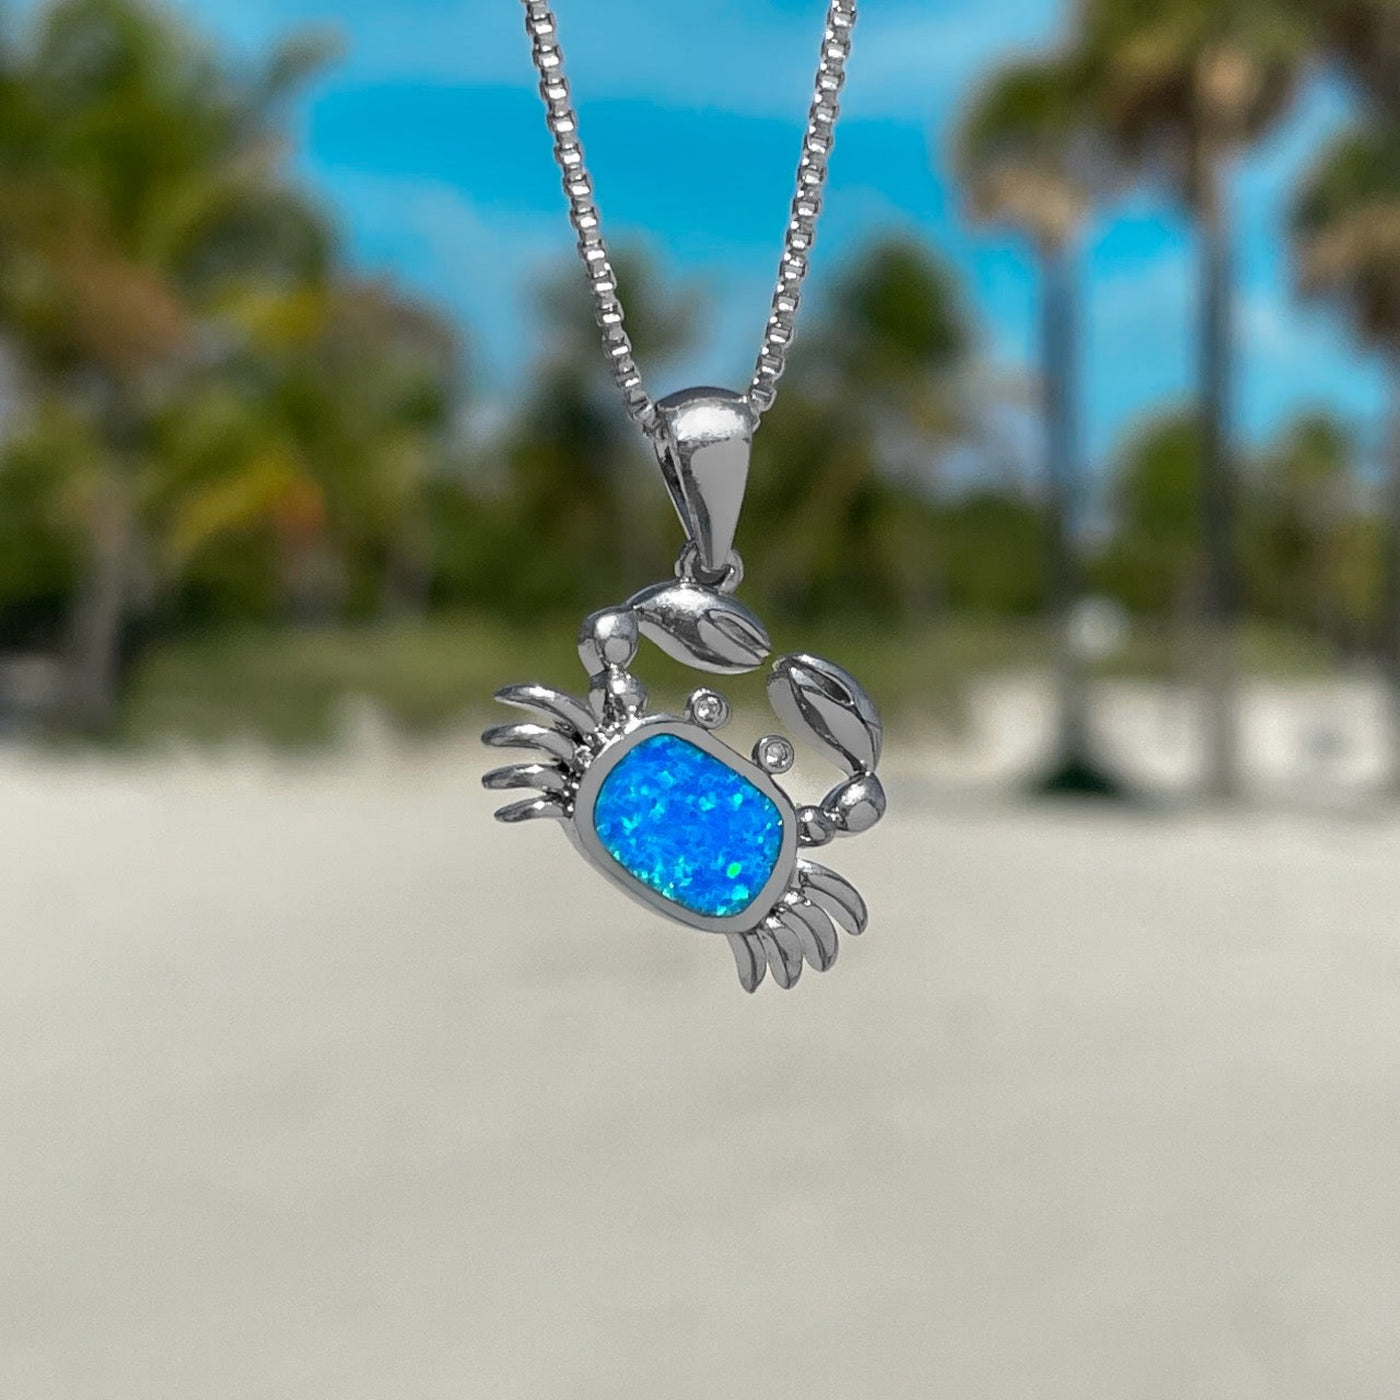 Opal Crab Necklace